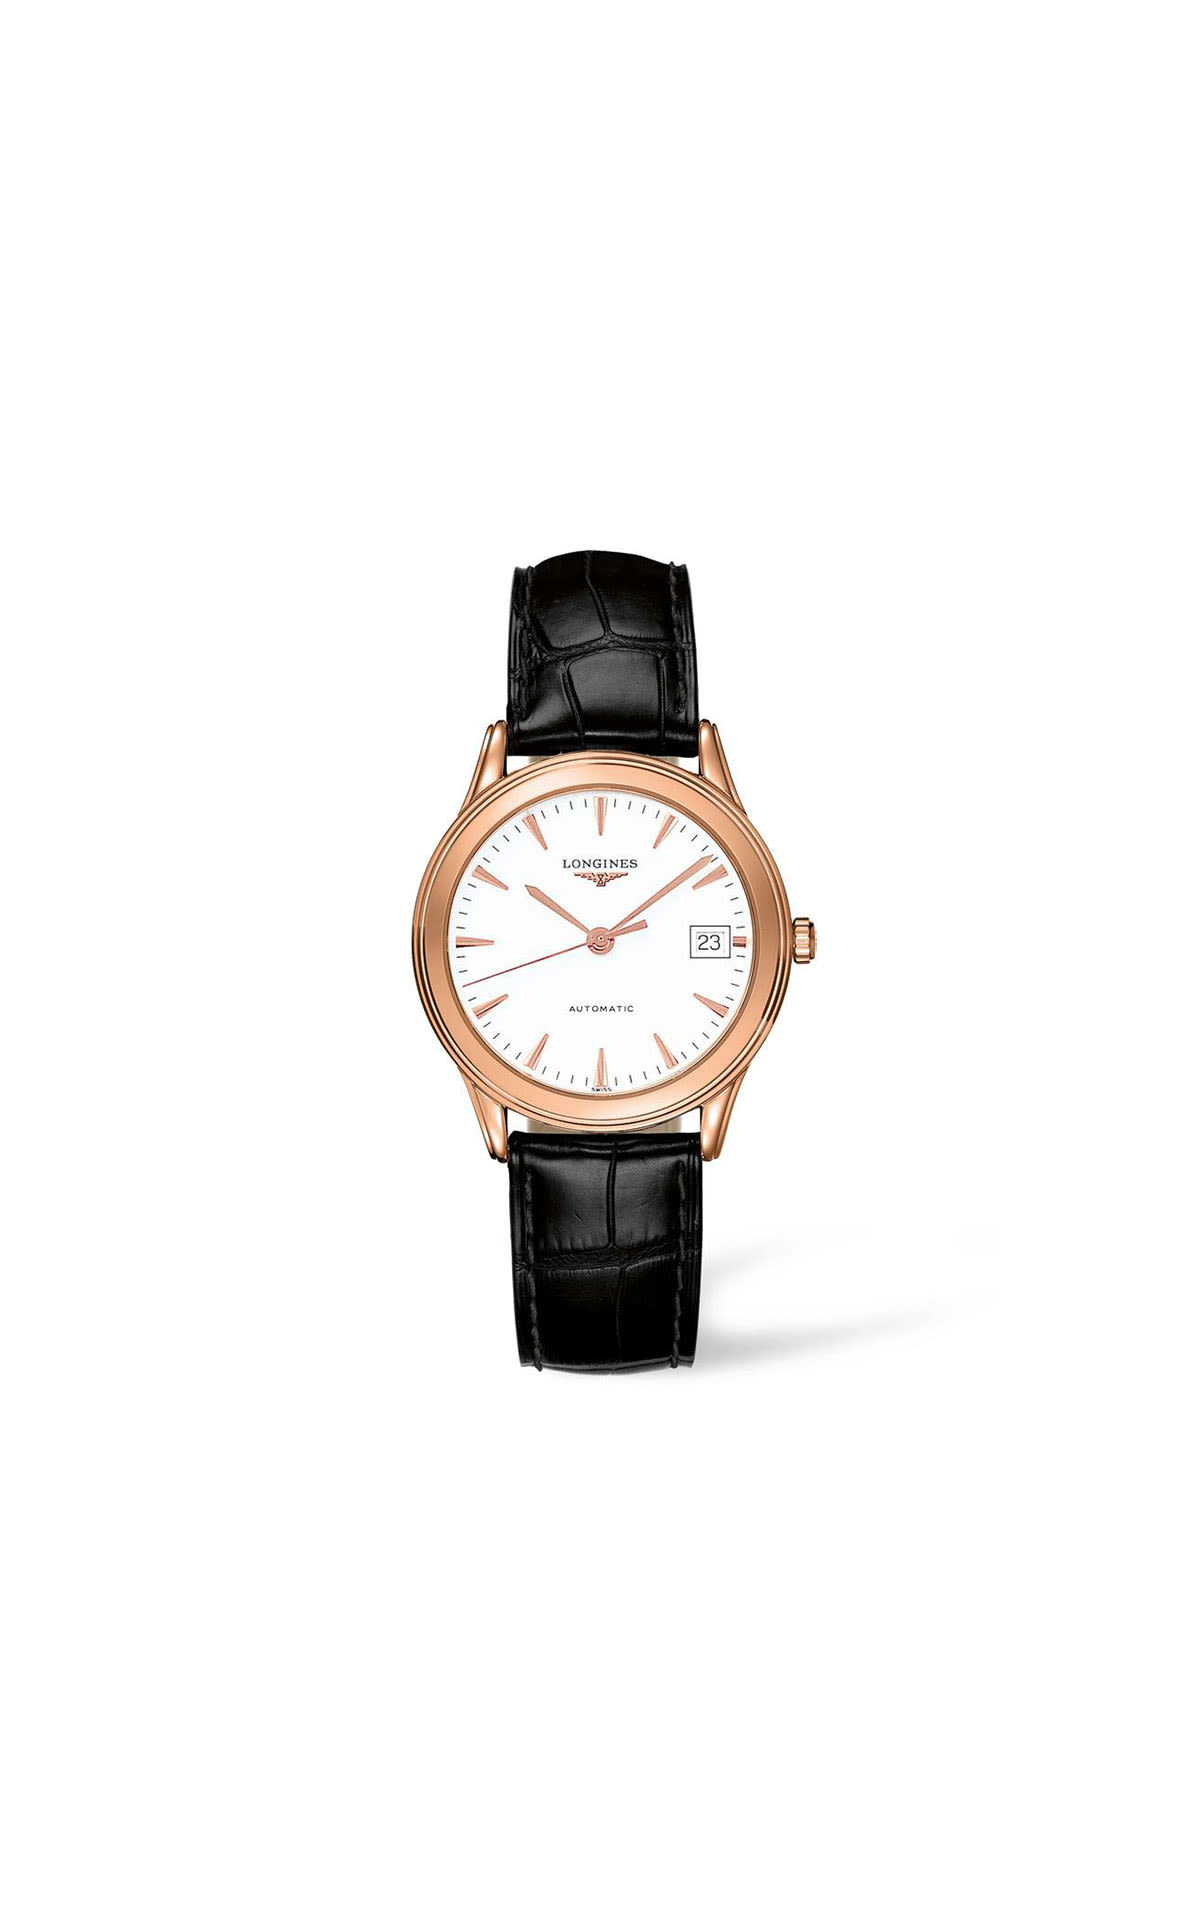 Hour Passion Longines Flagship Automatic 18k Rose Gold from Bicester Village